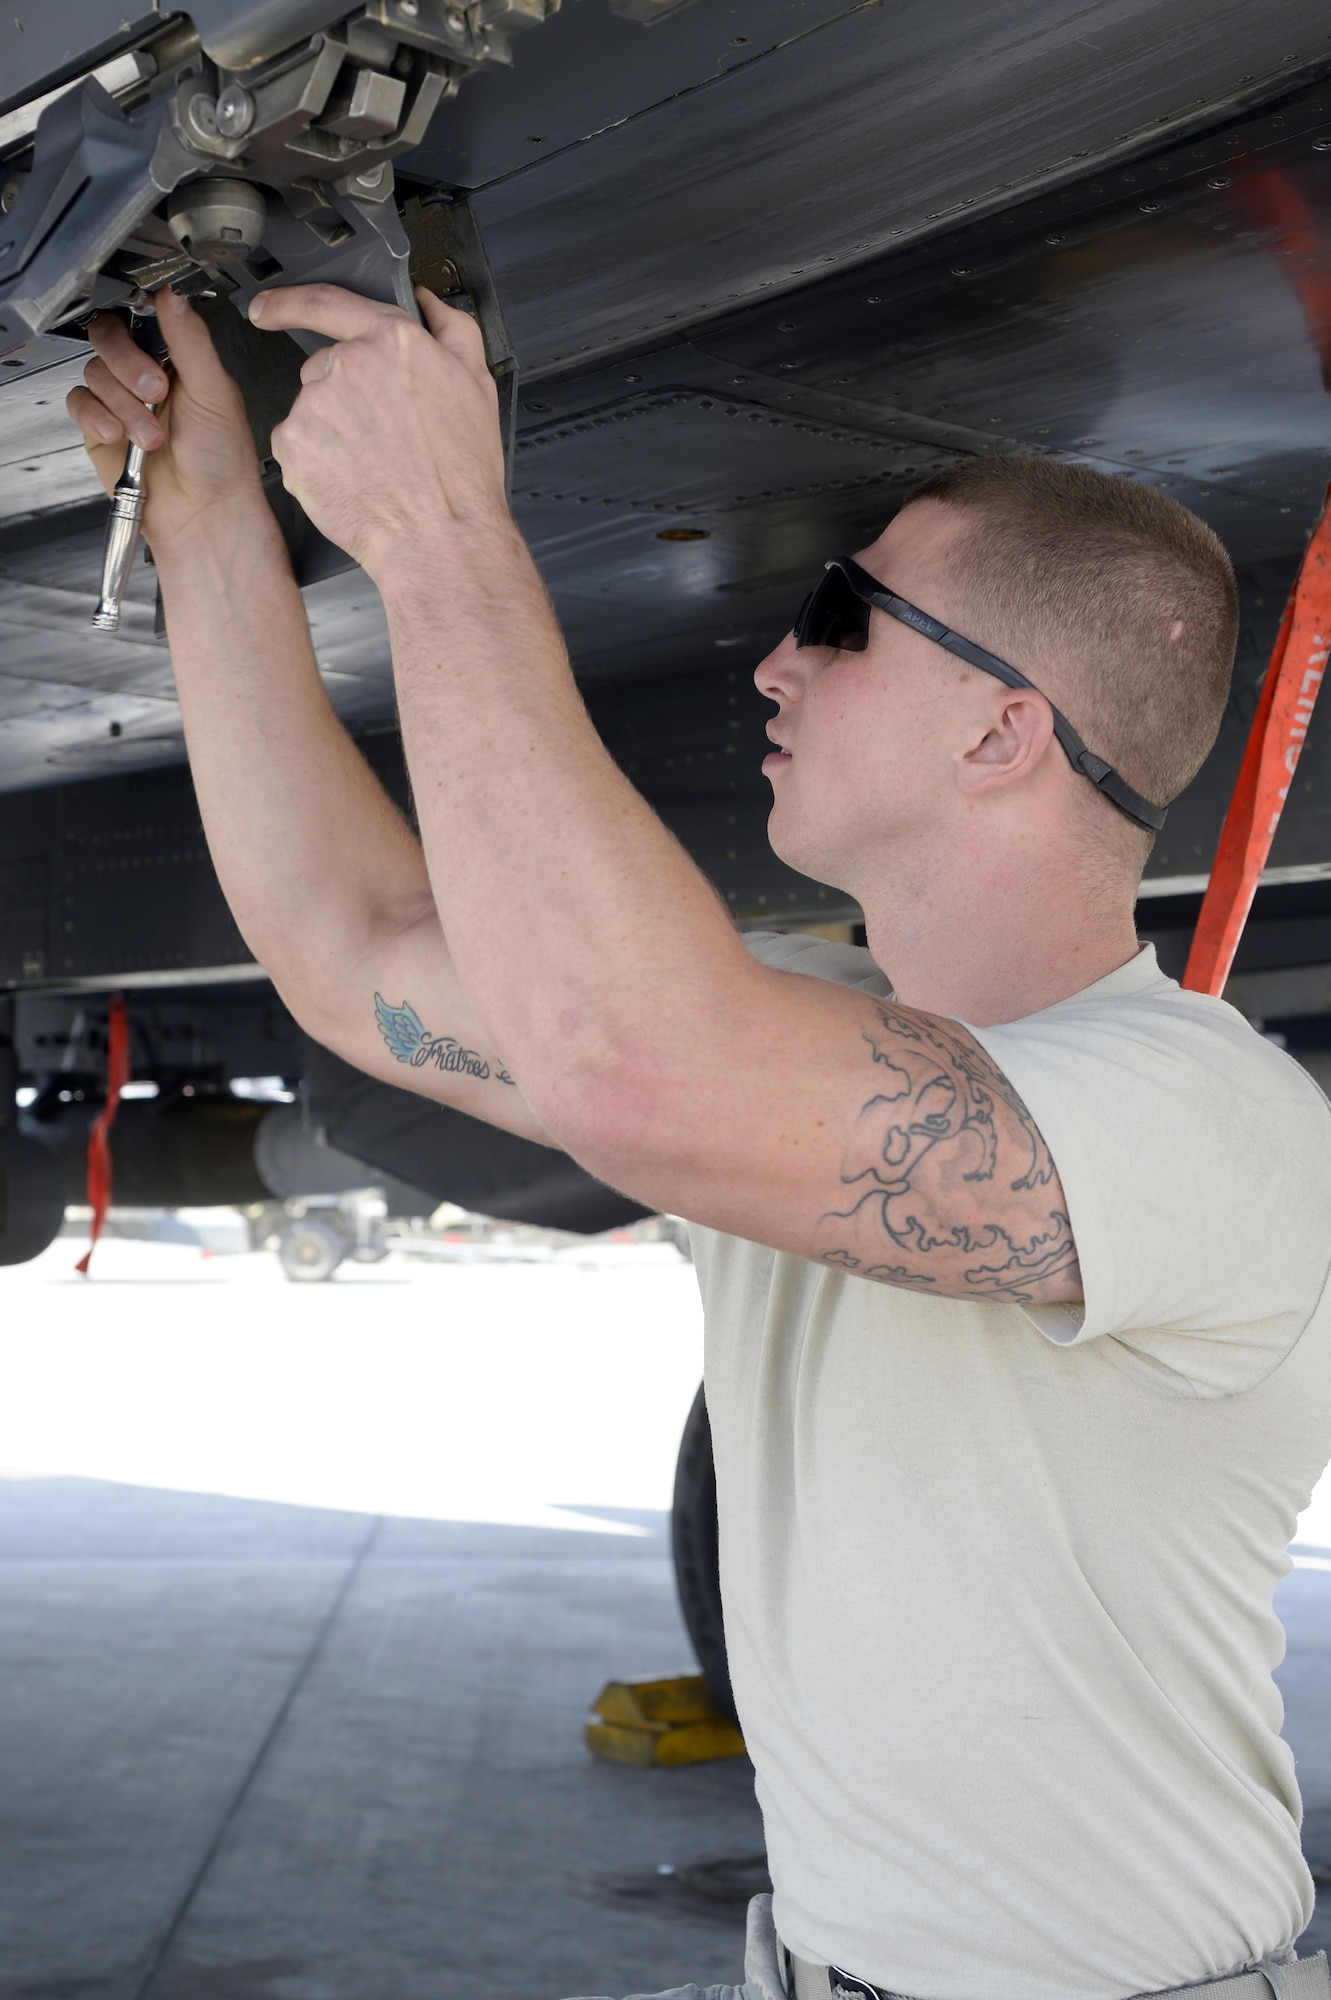 Senior Airman Michael, aircraft armament systems specialist, removes expended impulse cartridges during a post-flight inspection of an F-15E Strike Eagle at an undisclosed location in Southwest Asia Feb. 25, 2015. Since Jan. 31, 2015 there have been 8,194 weapons released by U.S. and coalition aircraft making it harder for Islamic State of Iraq and the Levant to sustain itself as a fighting force. Michael is currently deployed from Seymour Johnson Air Force Base, N.C., and is a native of Knoxville, Tenn. (U.S. Air Force photo/Tech. Sgt. Marie Brown)